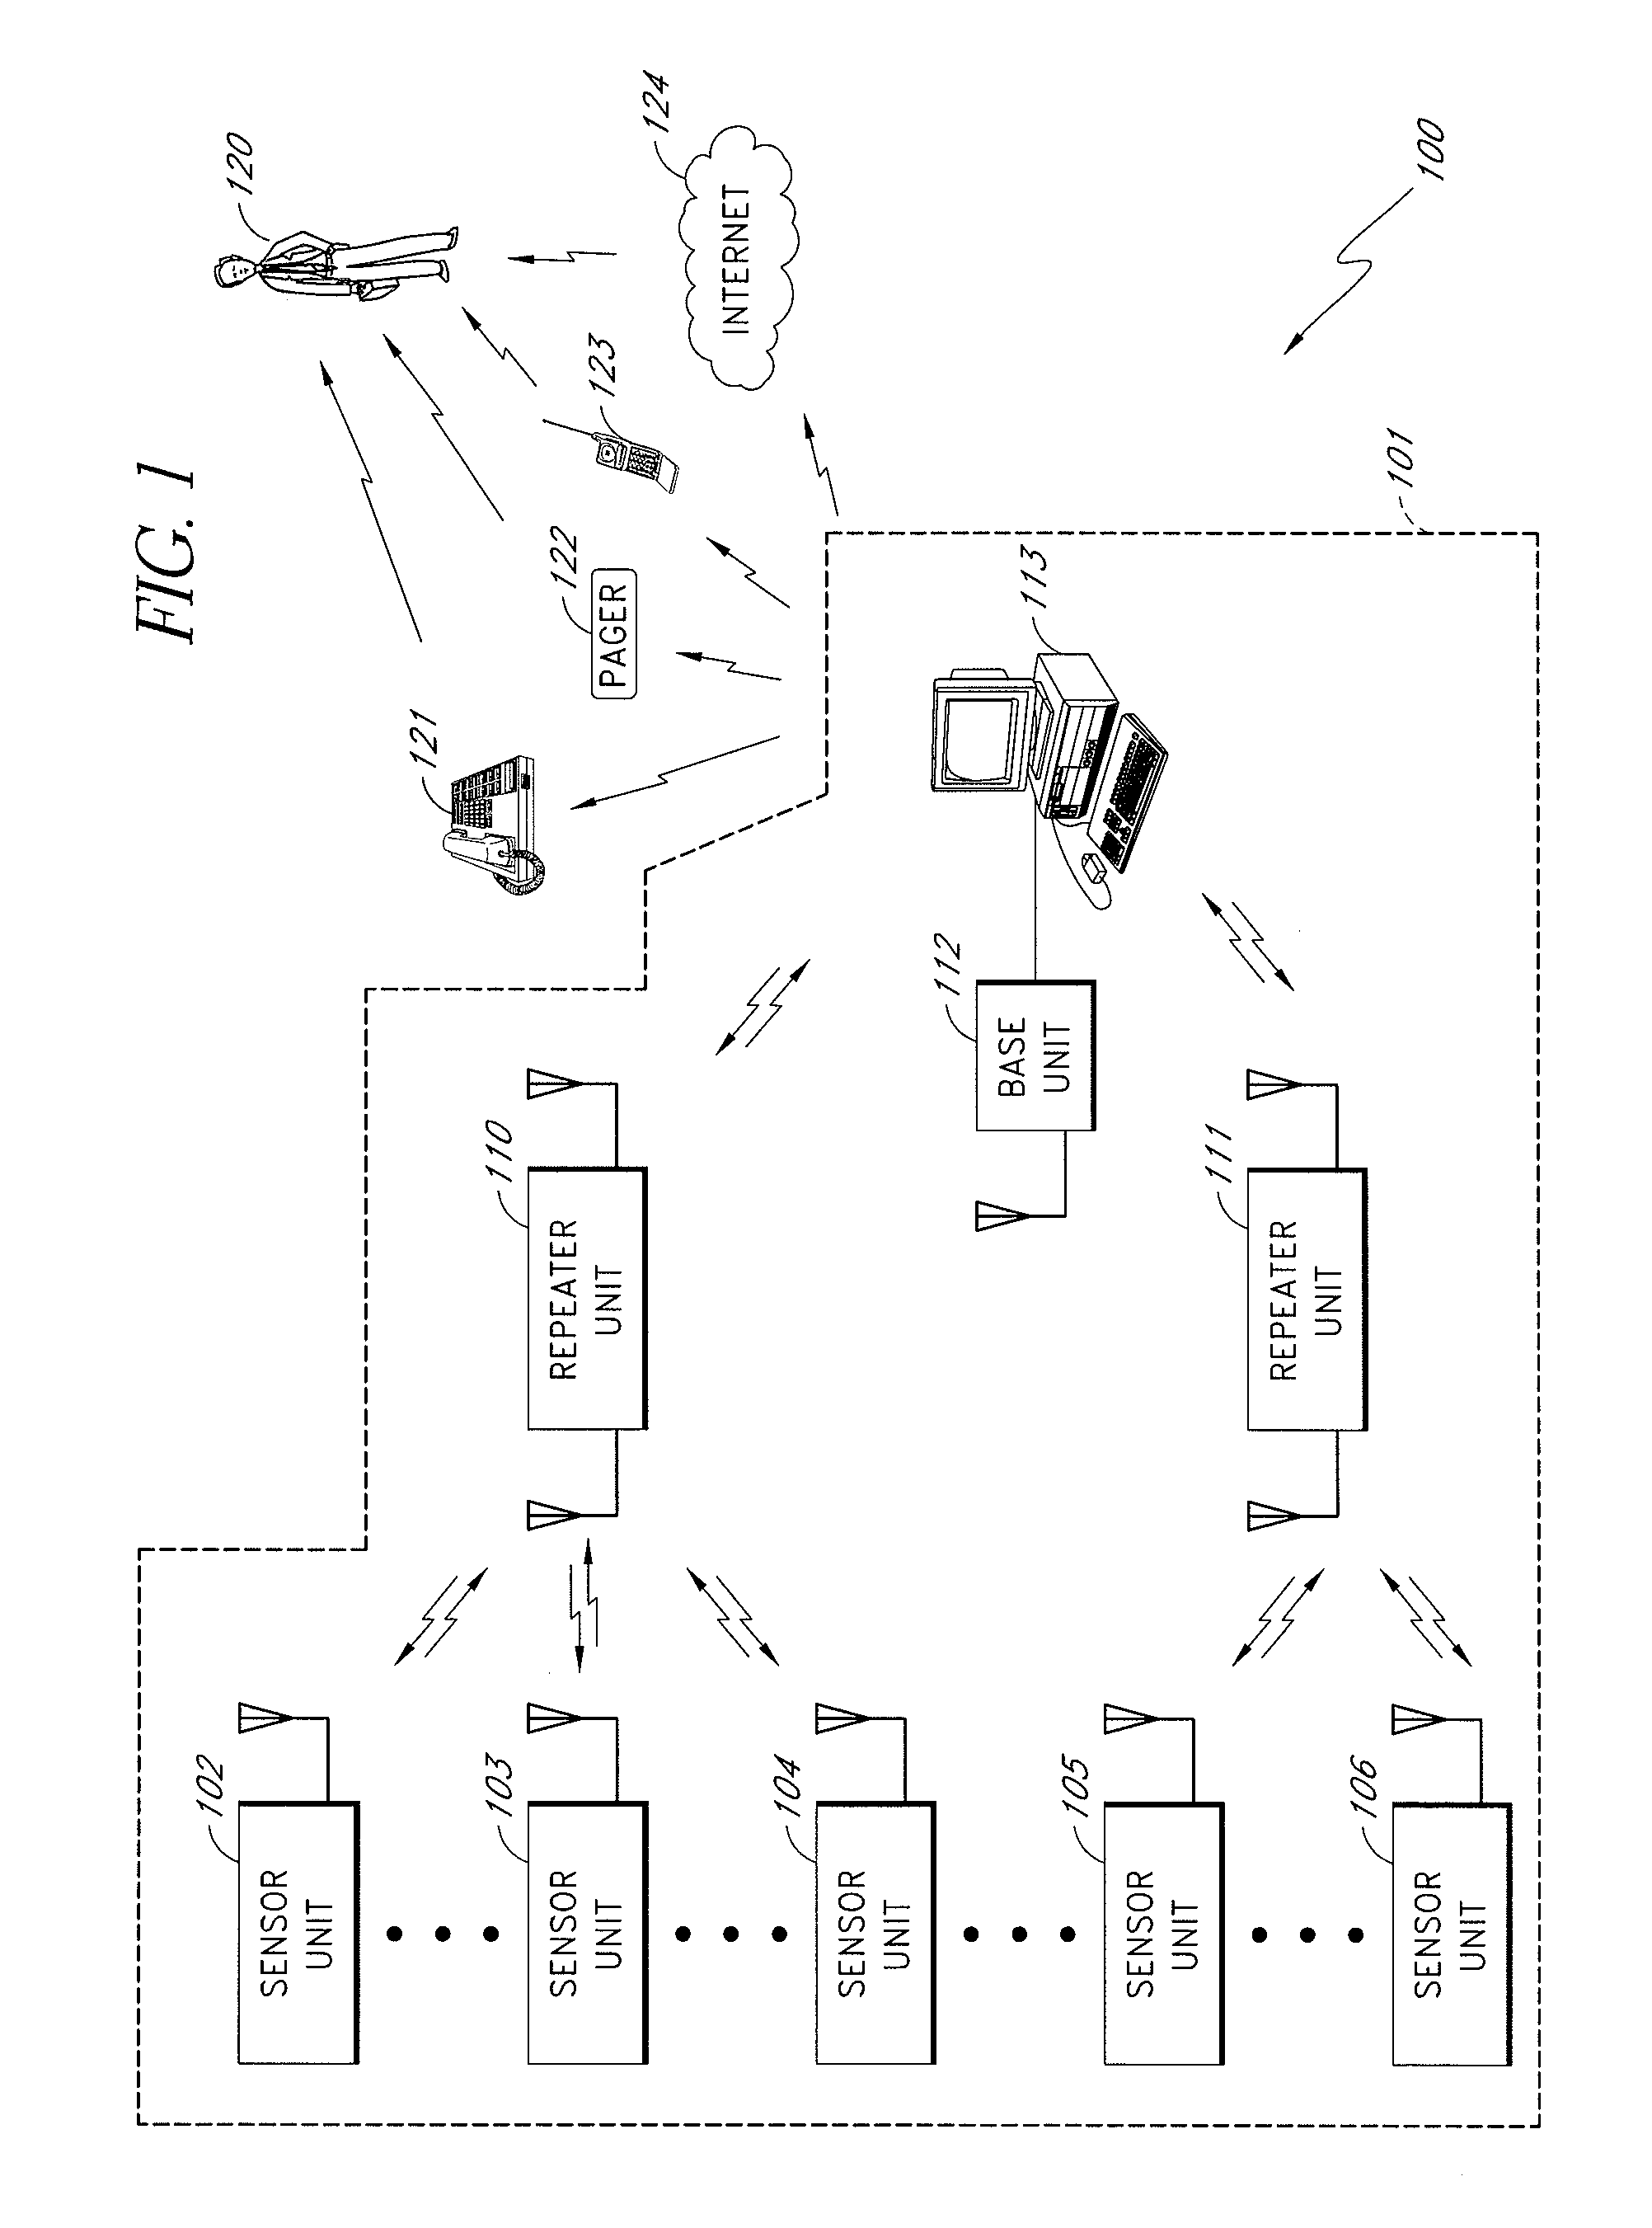 Method and apparatus for detecting severity of water leaks